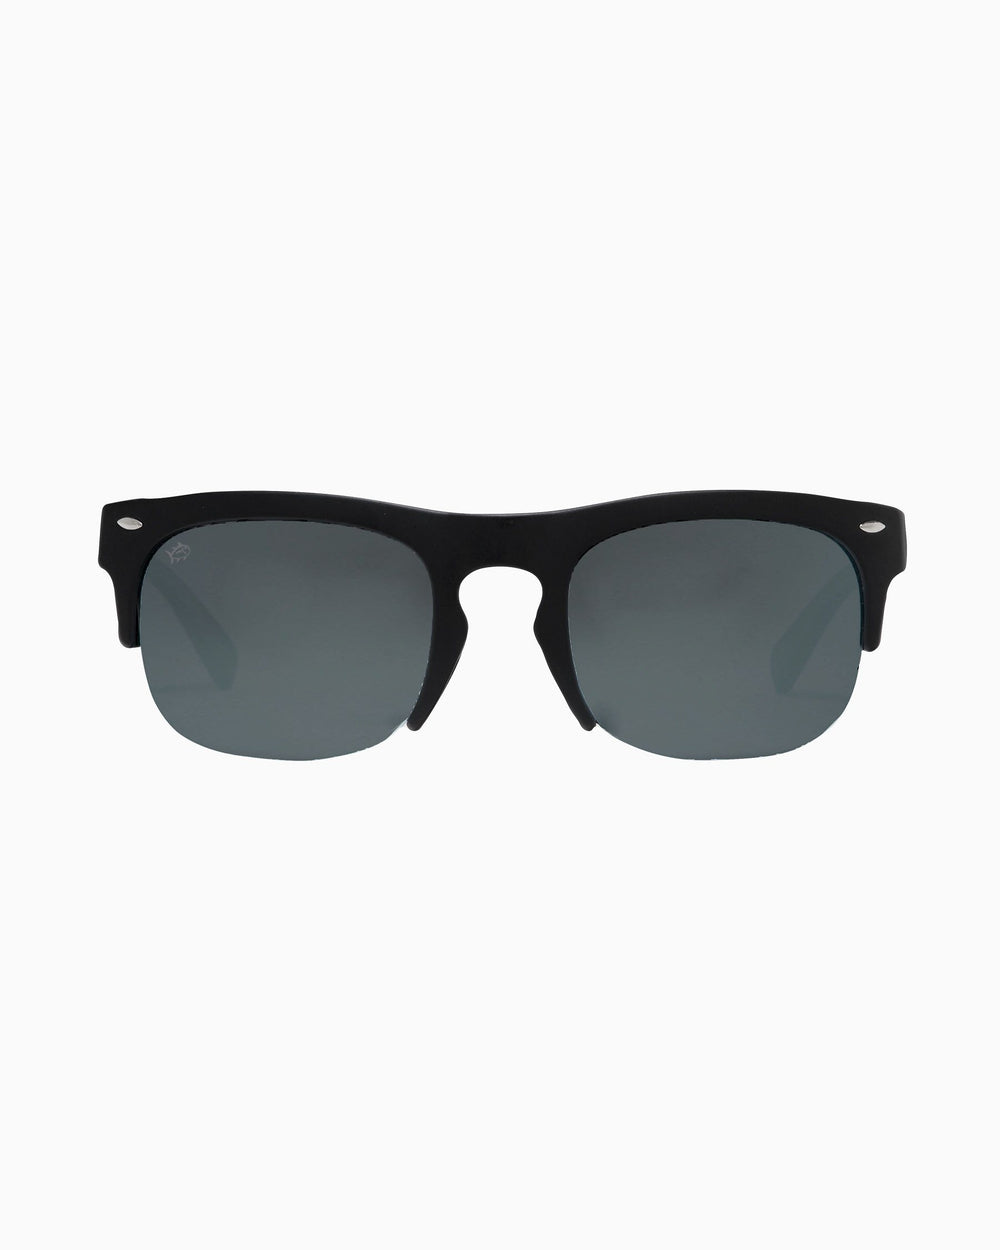 The front of the Men's Rheos Sullivans Sunglasses by Southern Tide - Gunmetal